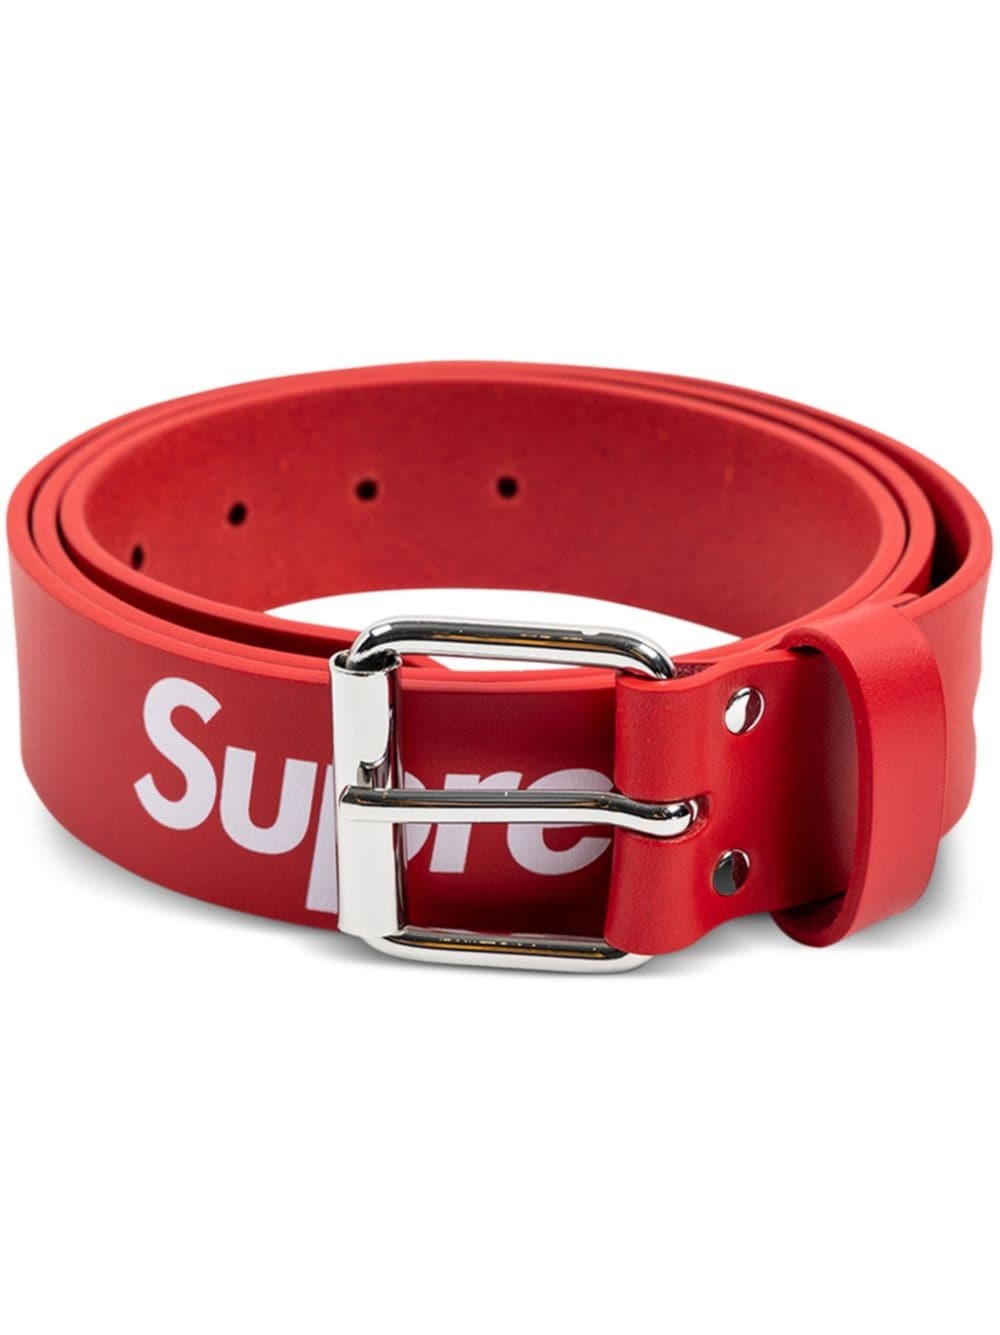 Repeat "Red" leather belt - 1